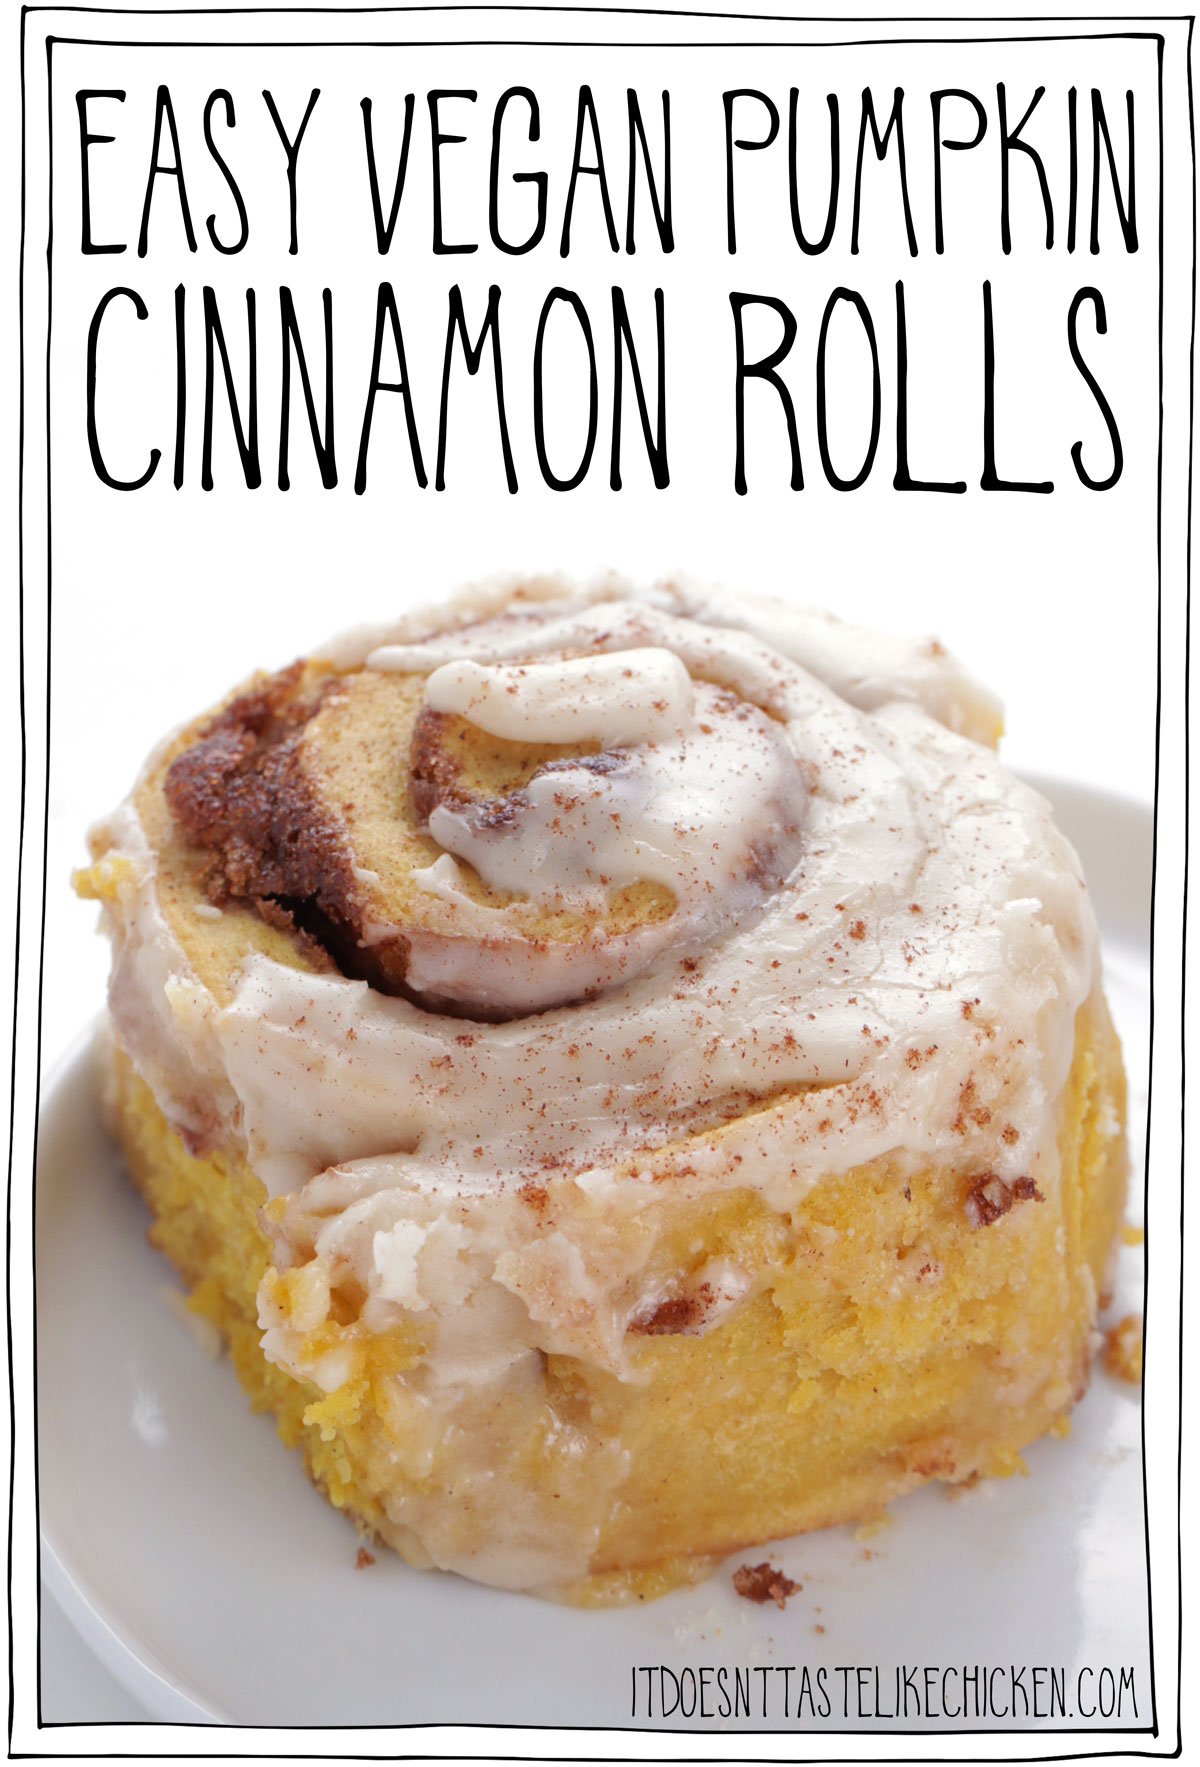 These easy vegan pumpkin cinnamon rolls are the perfect treat on a chilly autumn day. Soft, moist, pumpkin-infused dough, swirled with buttery brown sugar and pumpkin pie spice, and topped with a simple vegan cream cheese icing. These rolls are also easy to make, requiring no yeast at all! Perfect for a make-ahead breakfast. #itdoesnttastelikechicken #veganrecipes #vegandesserts #veganbaking #pumpkin #thanksgiving